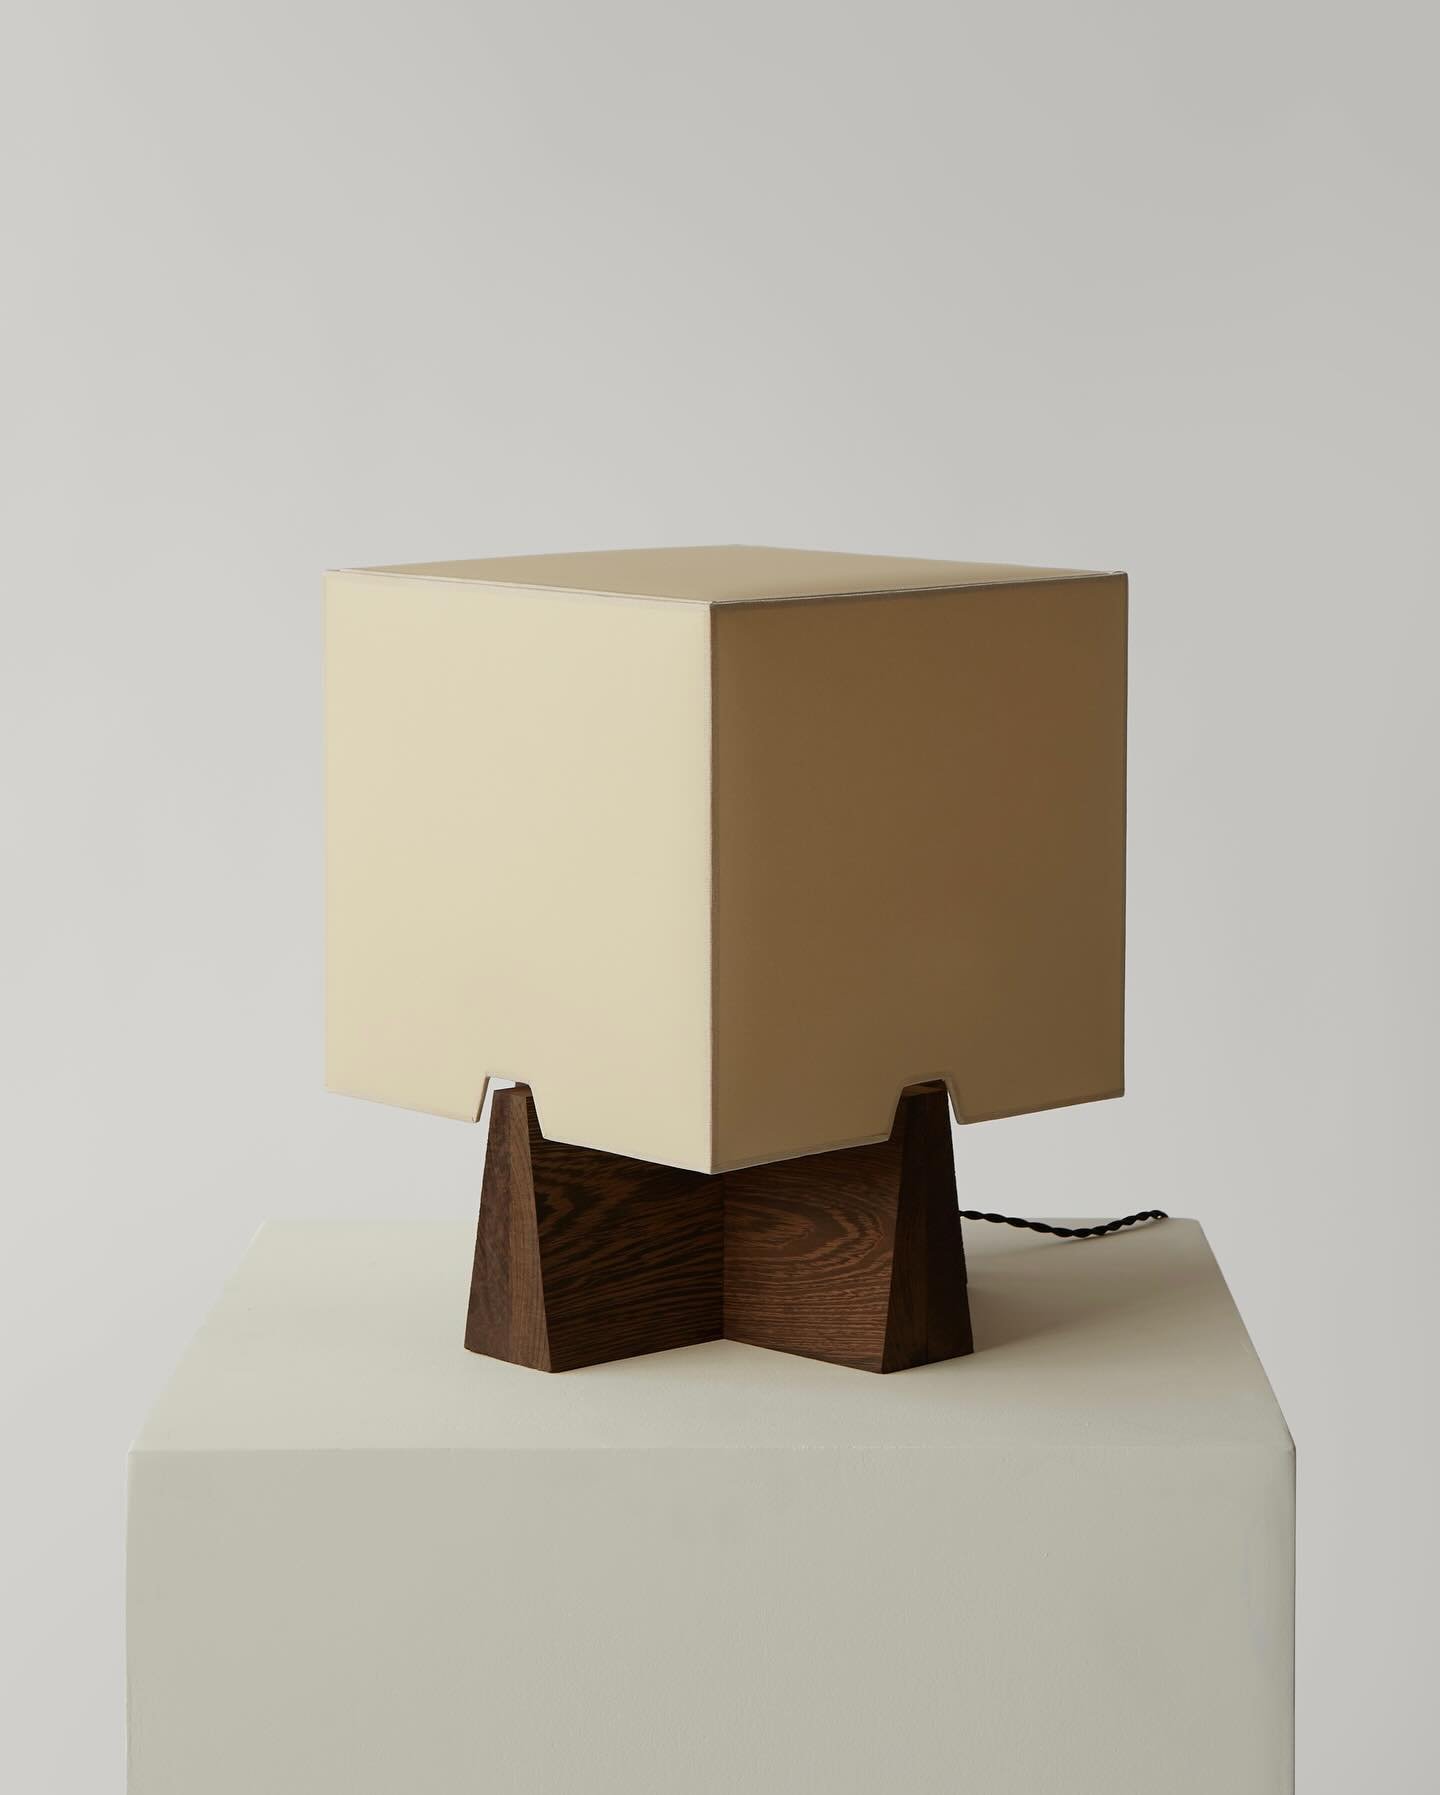 the Lucie table lamp 💡 made by hand in New York from tapered solid wood intersecting a cube shade in european vellum. Shown here sampled in a custom Wenge base, available in oxidized white oak or bleached ash